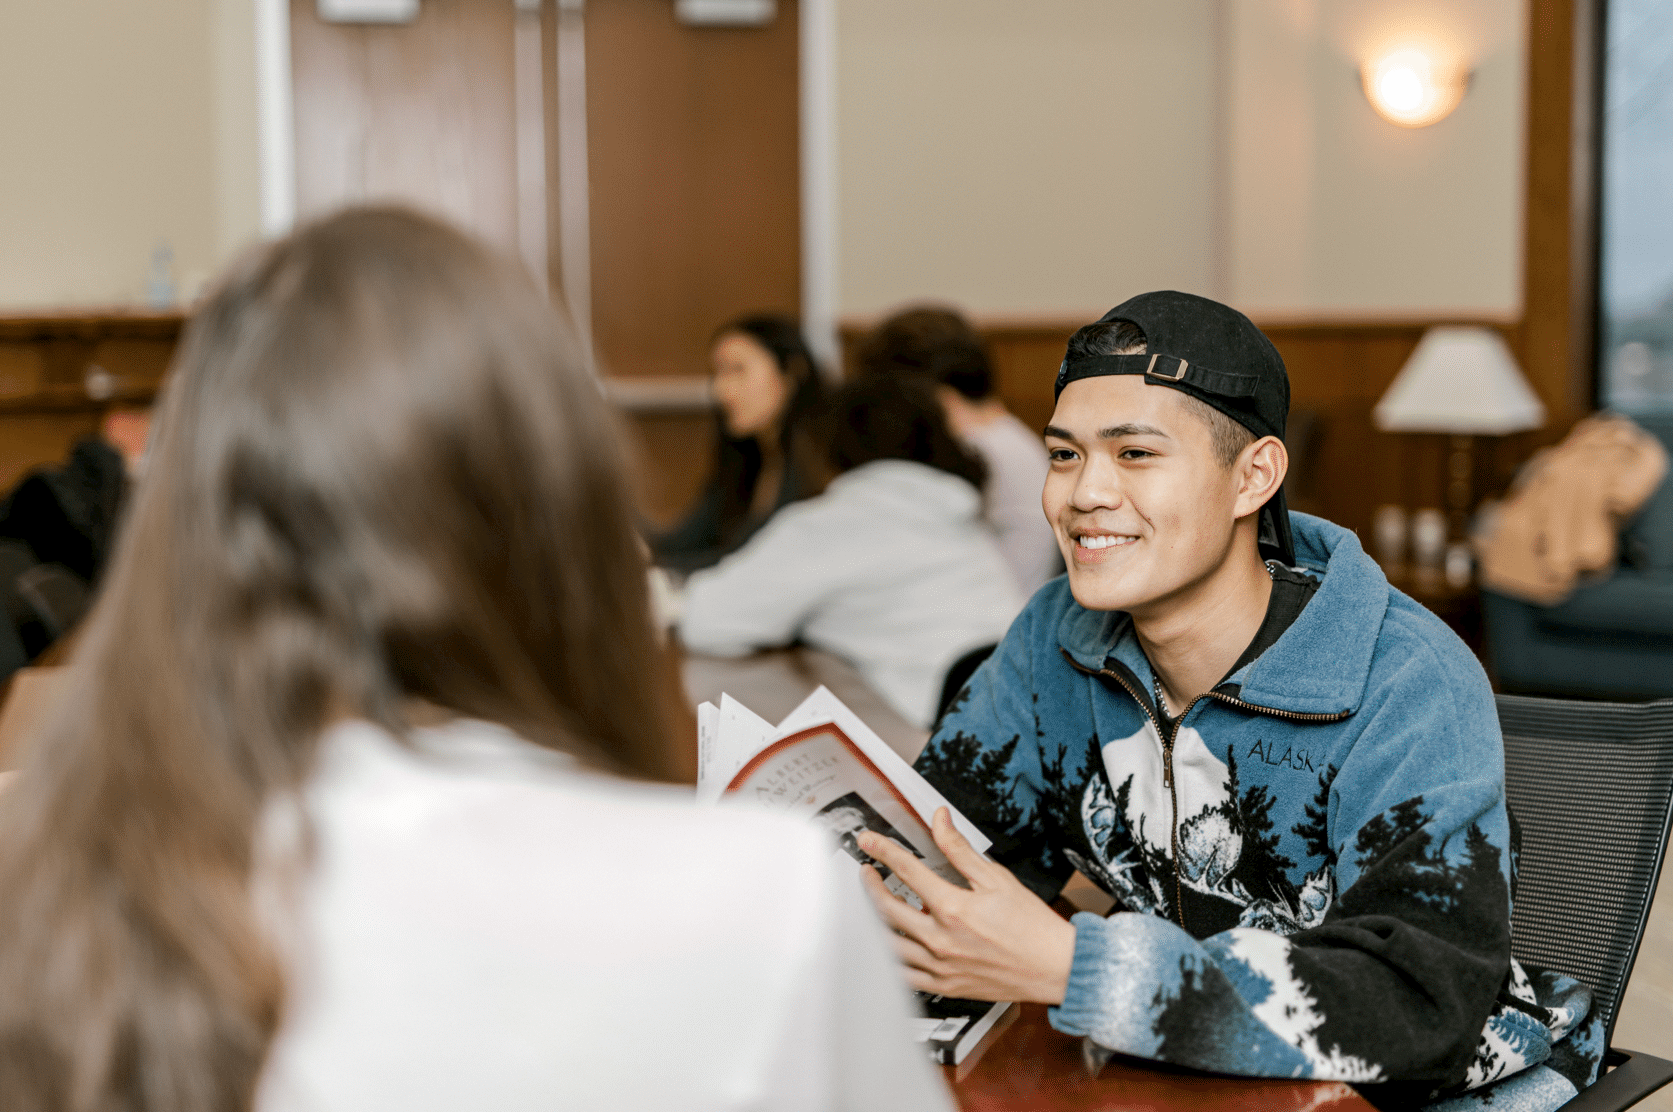 Sitting at a table, a student smiles as he looks up to talk to his peer